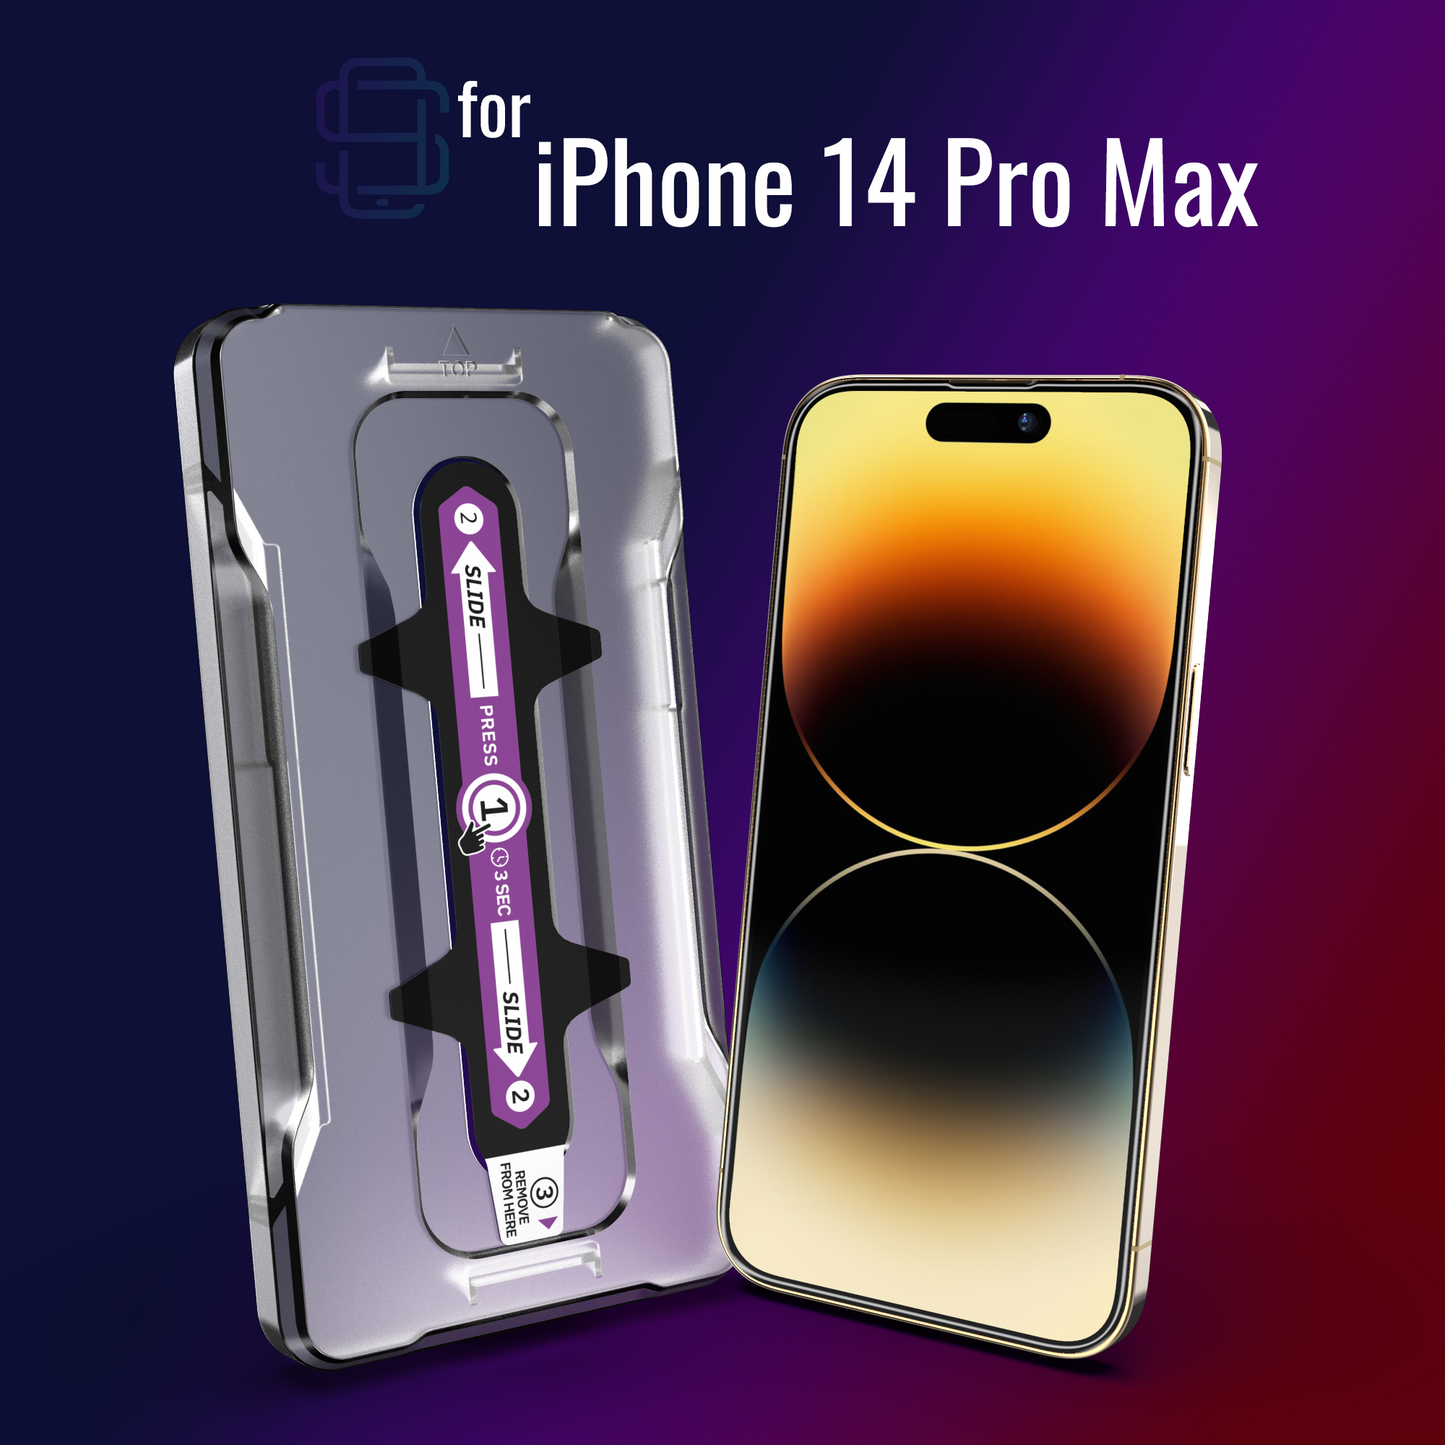 Defenslim iPhone 14 Pro Max Screen Protector [2-Pack] with Easy Auto-Align Install Kit